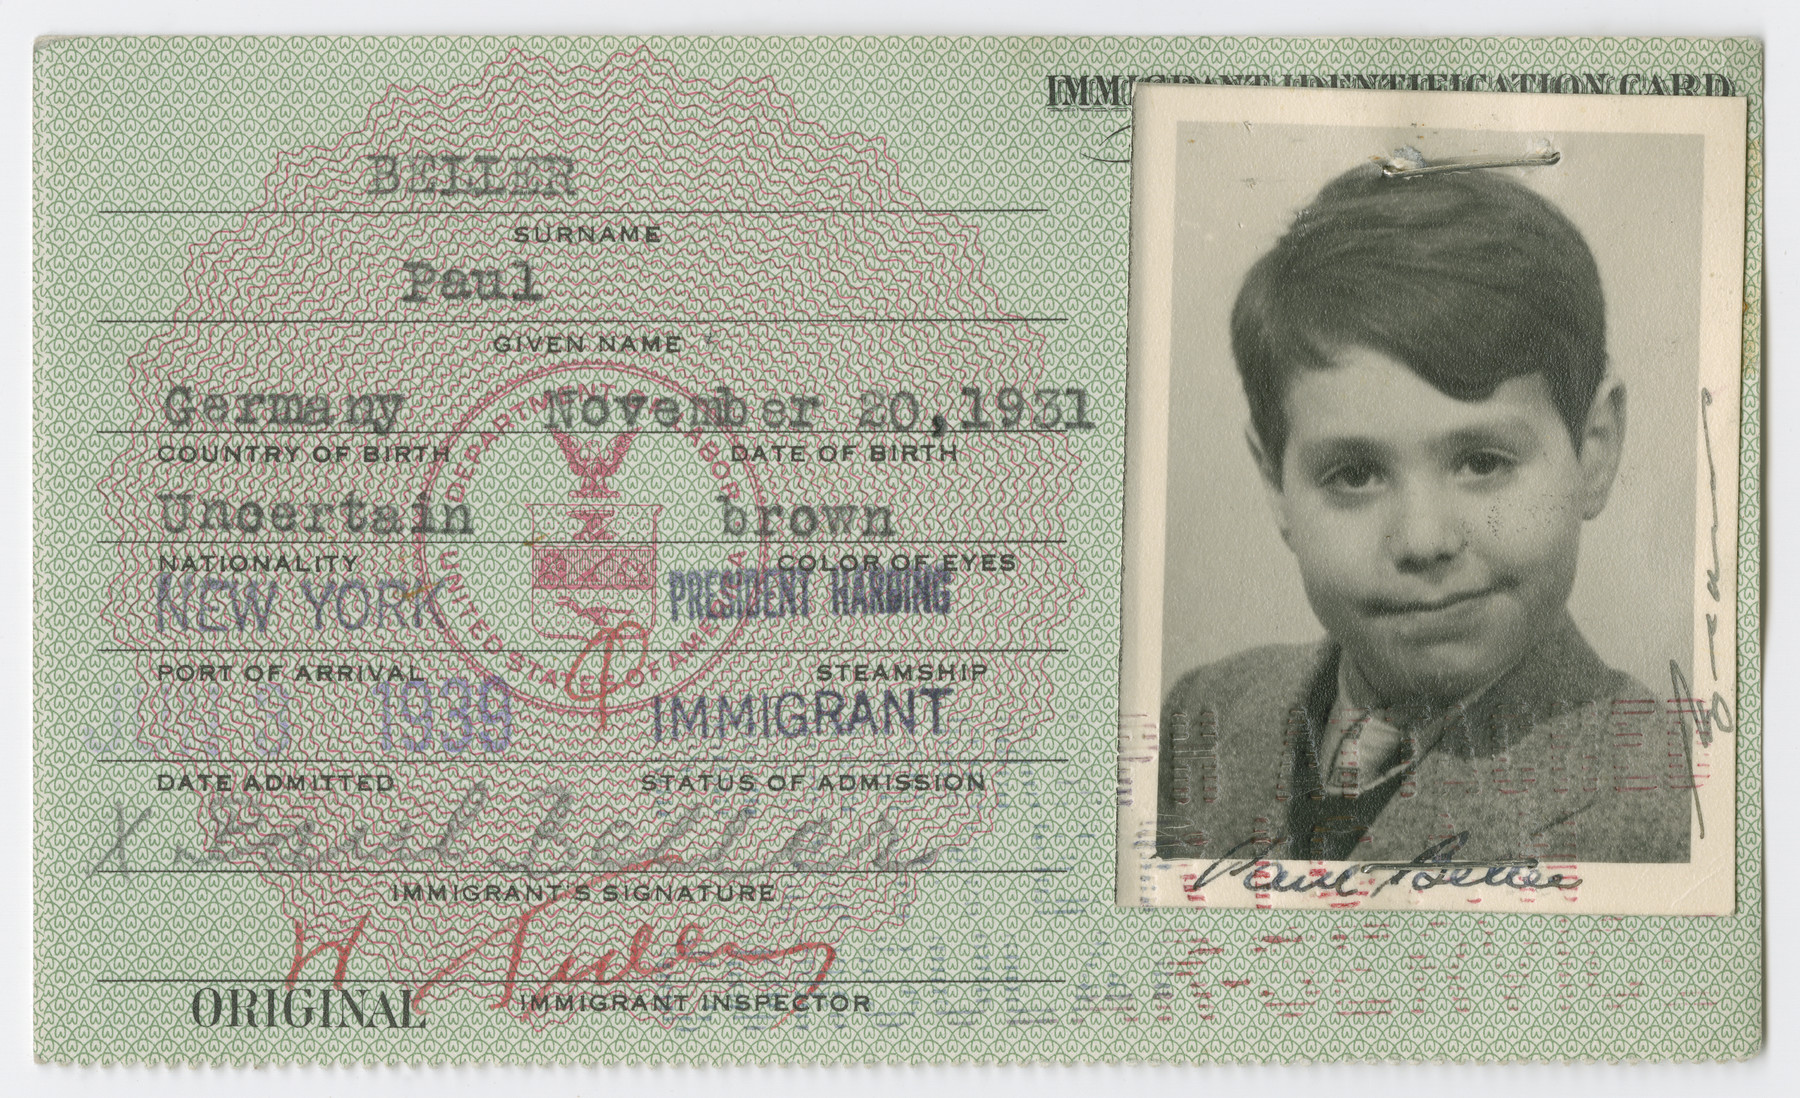 United States Immigrant Identification Card issued to Paul Beller.

It states he was born in Germany though he was born in Vienna.